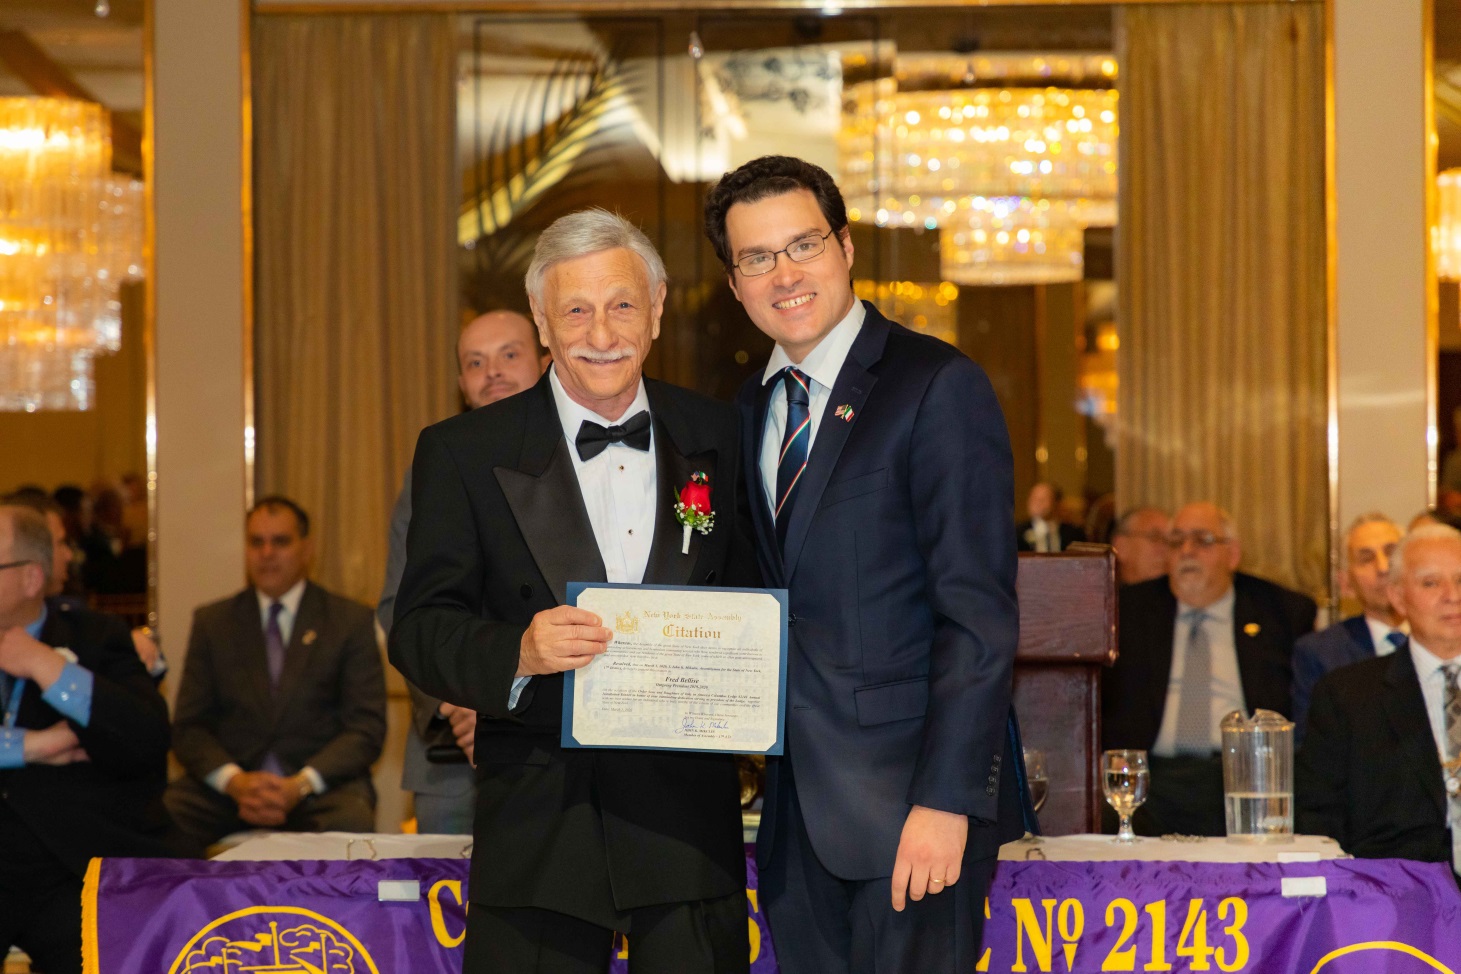 Assemblyman John Mikulin (R,C,I-Bethpage) presents Fred Bellise, outgoing president of the Sons of Italy Columbus Lodge 2143, with a citation at their installation ceremony on Sunday, March 1 at the R